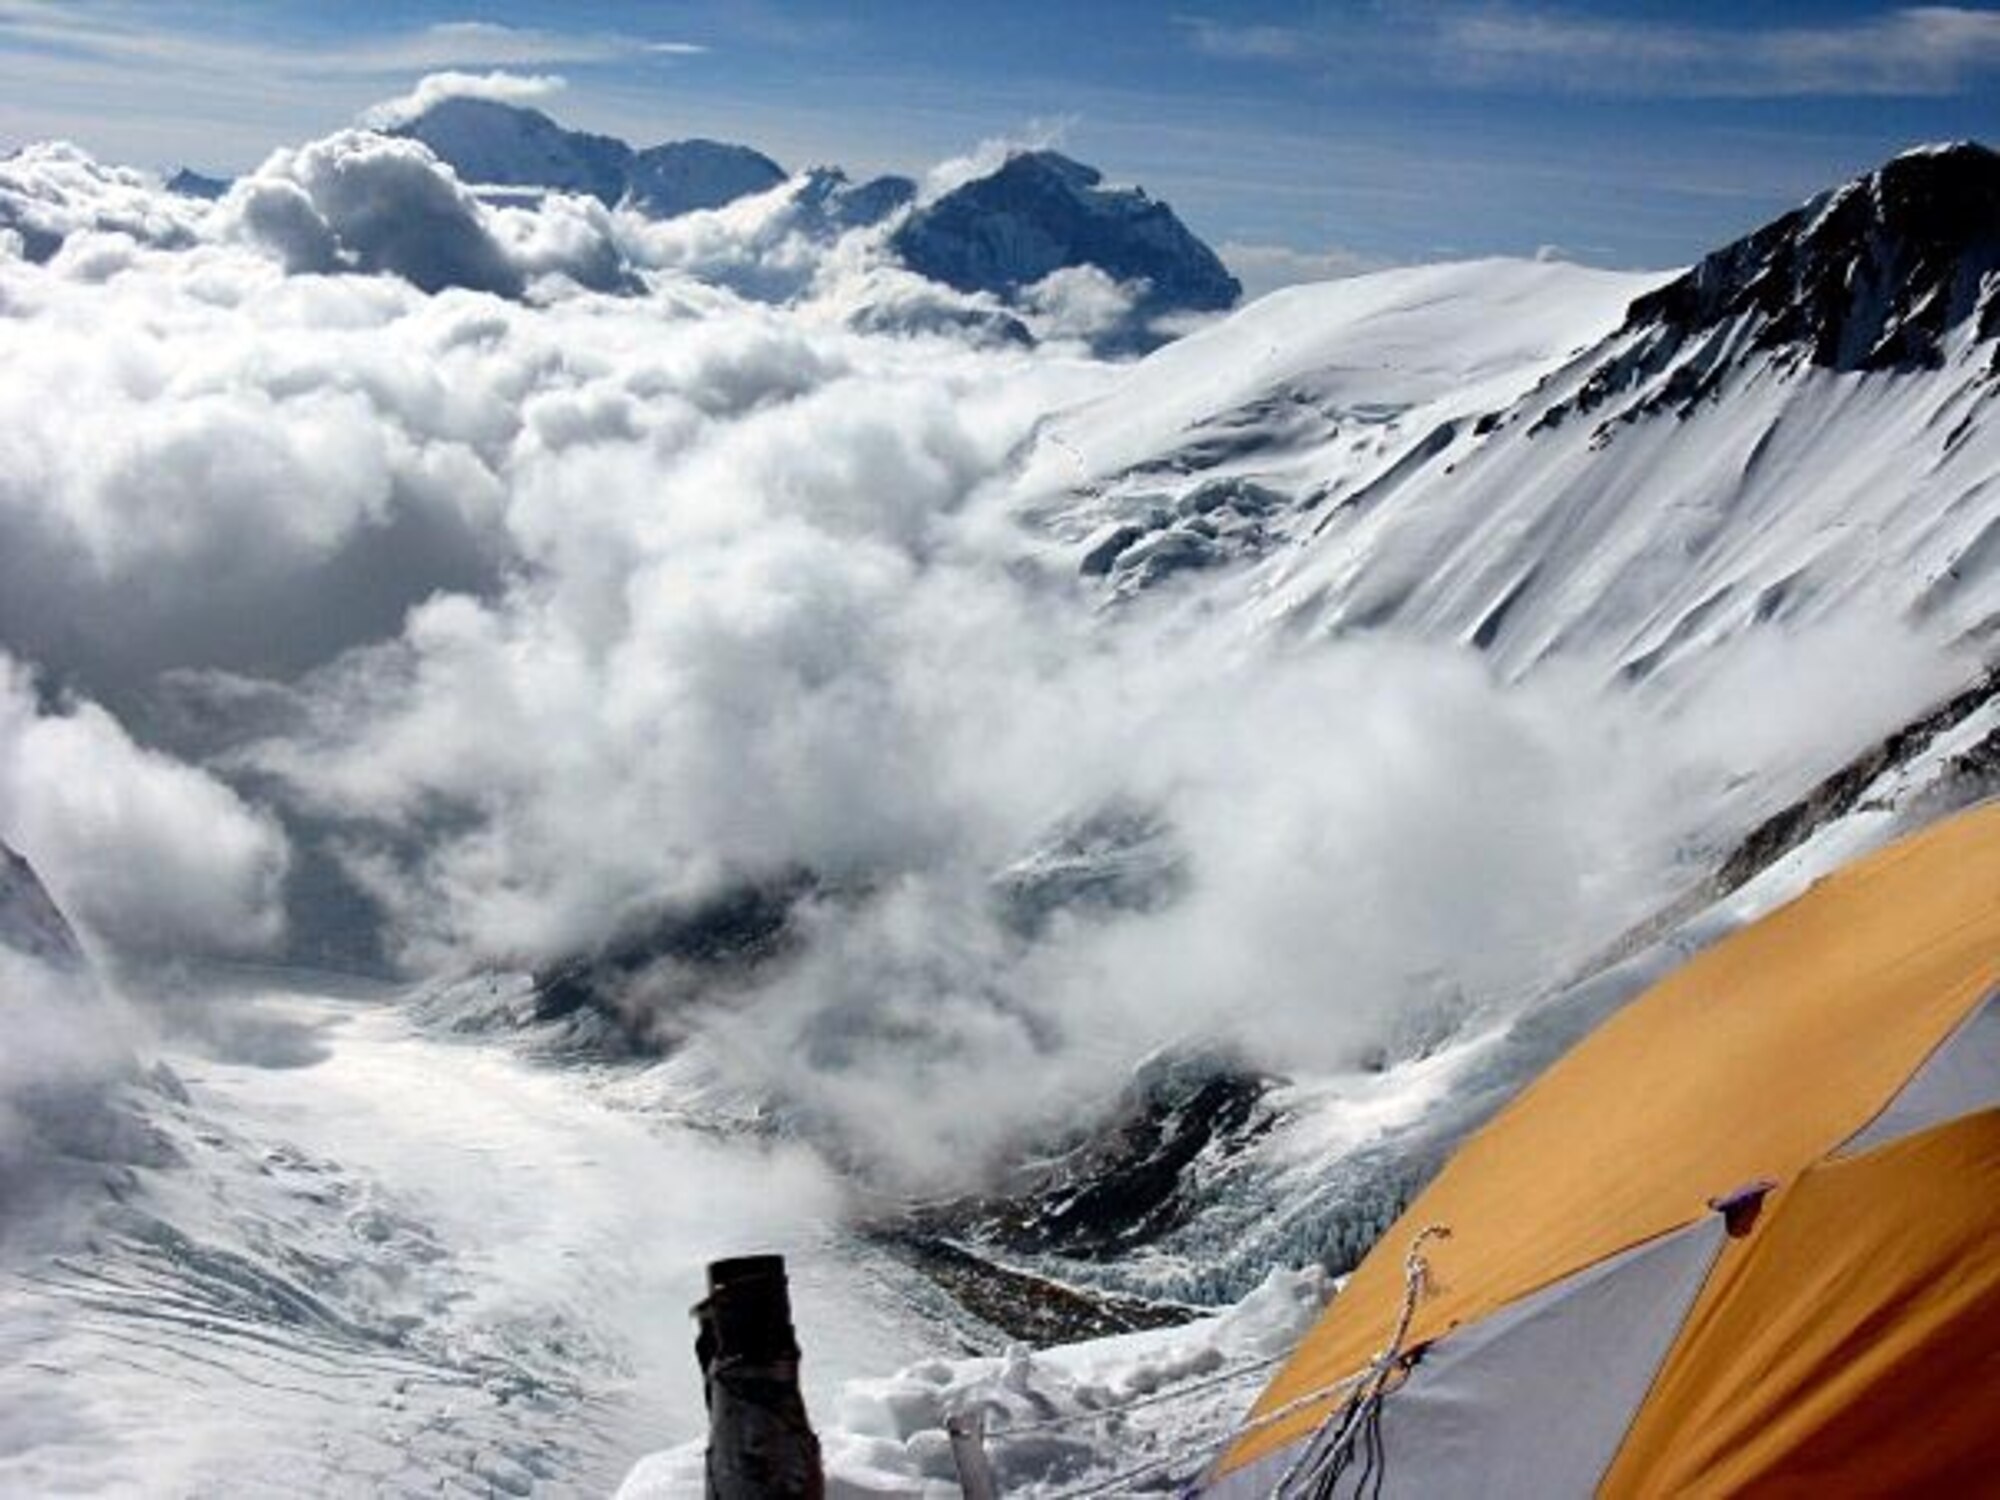 The view from Camp 3, looking back toward Camp 2 and the Khumbu Icefall. (Photo by Justin Merle, IMG)